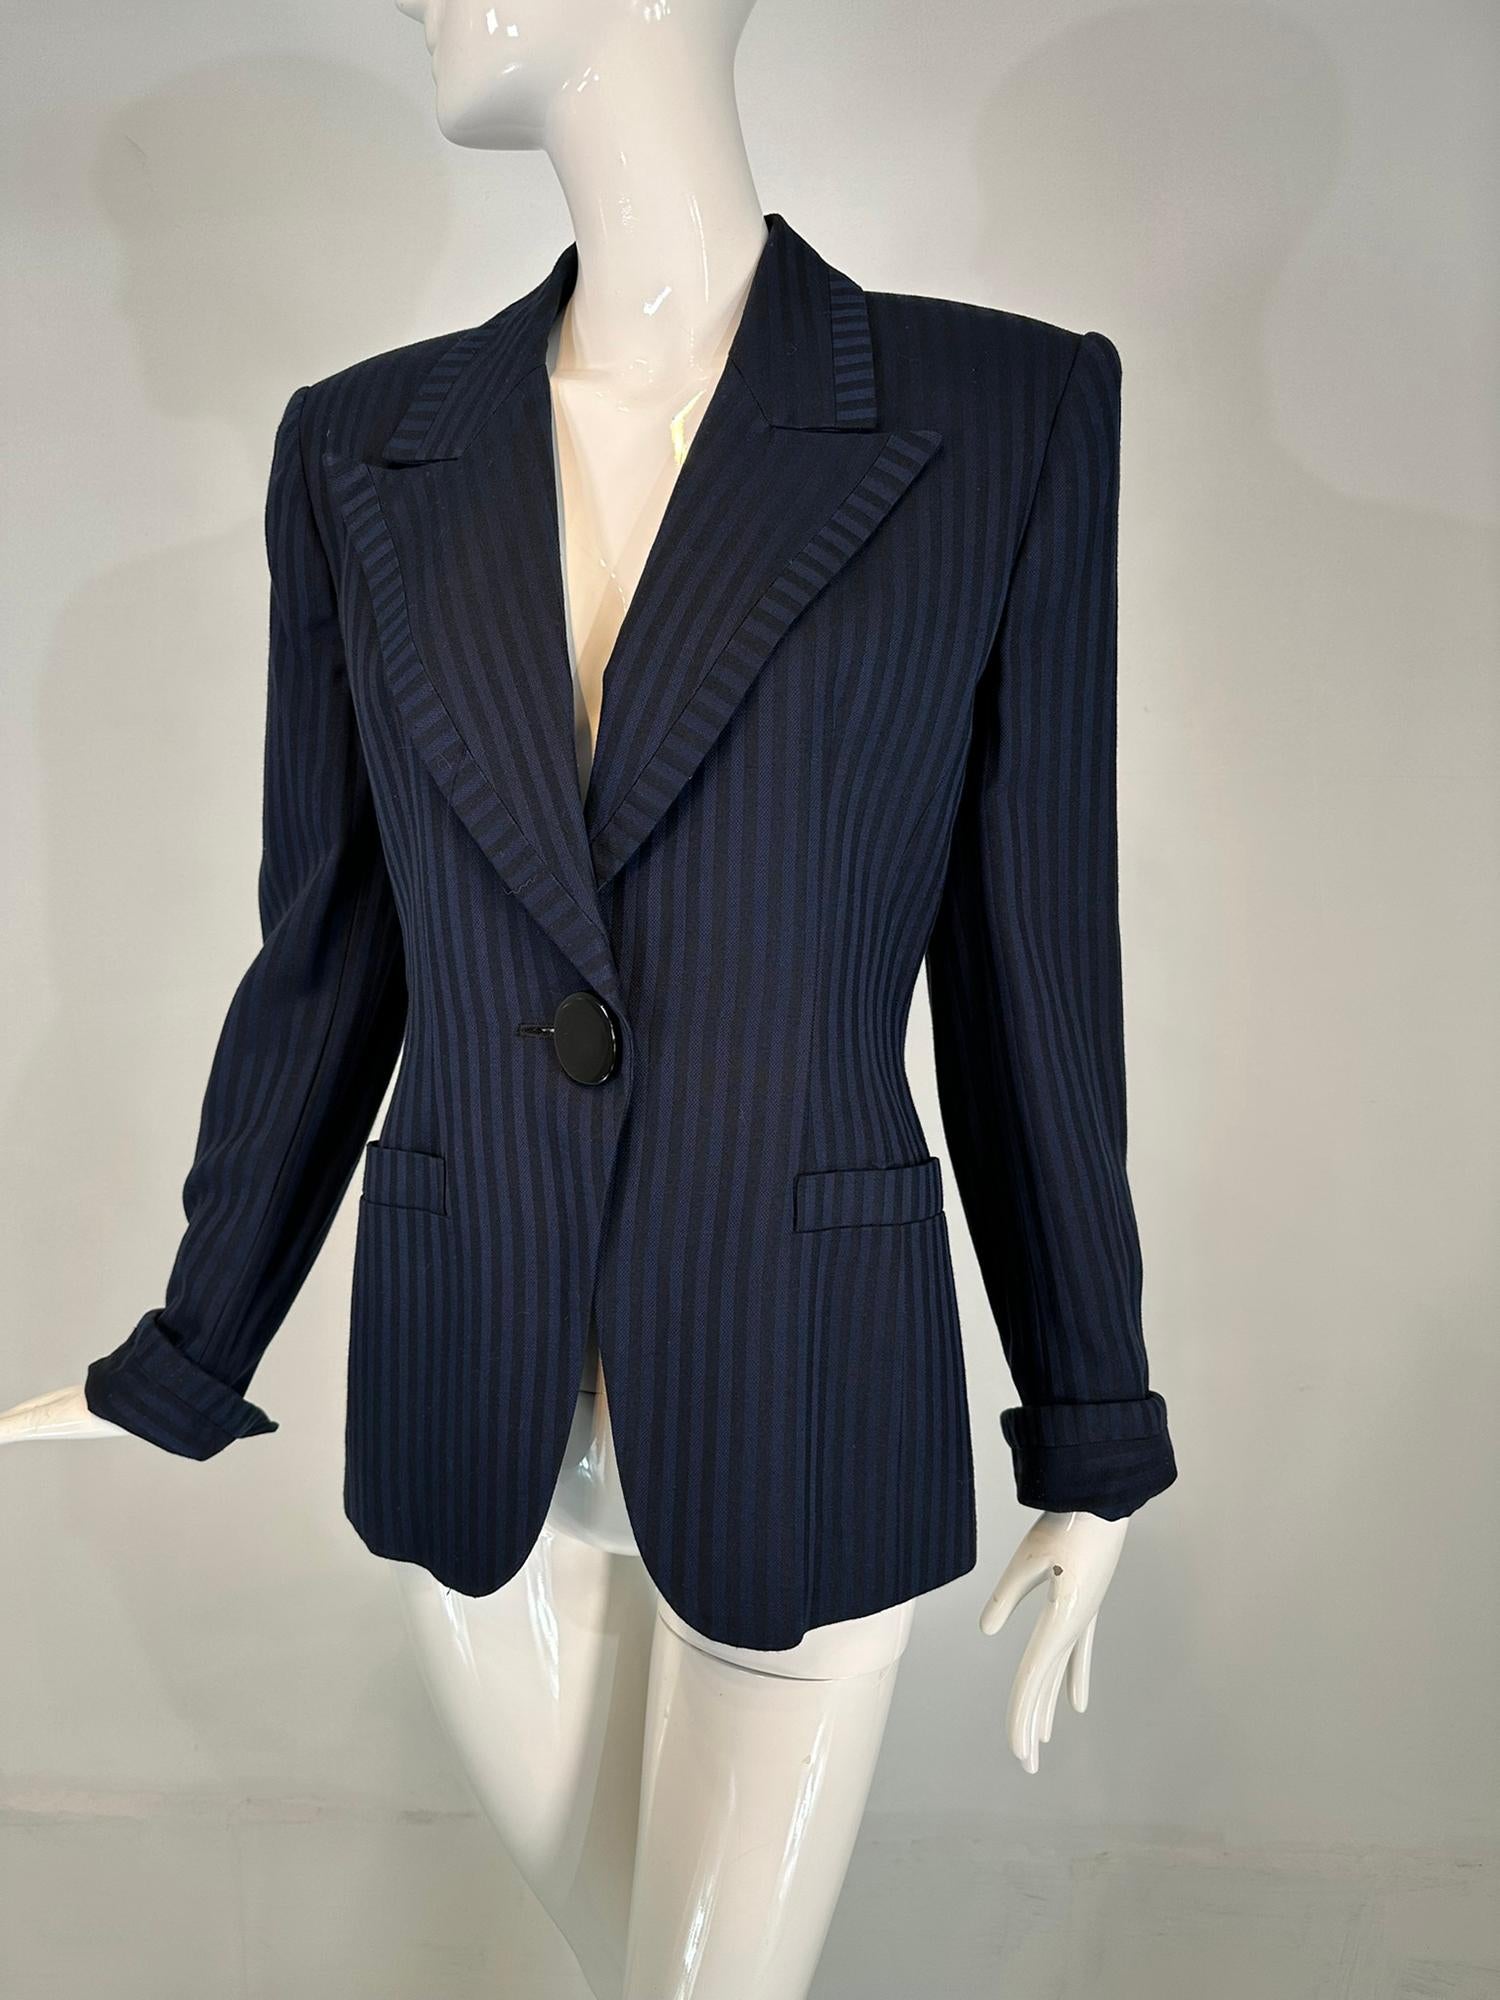 Christian Dior Navy Blue & Black Wide Stripe Wool Twill Jacket Late 90s-2000s 4 For Sale 10